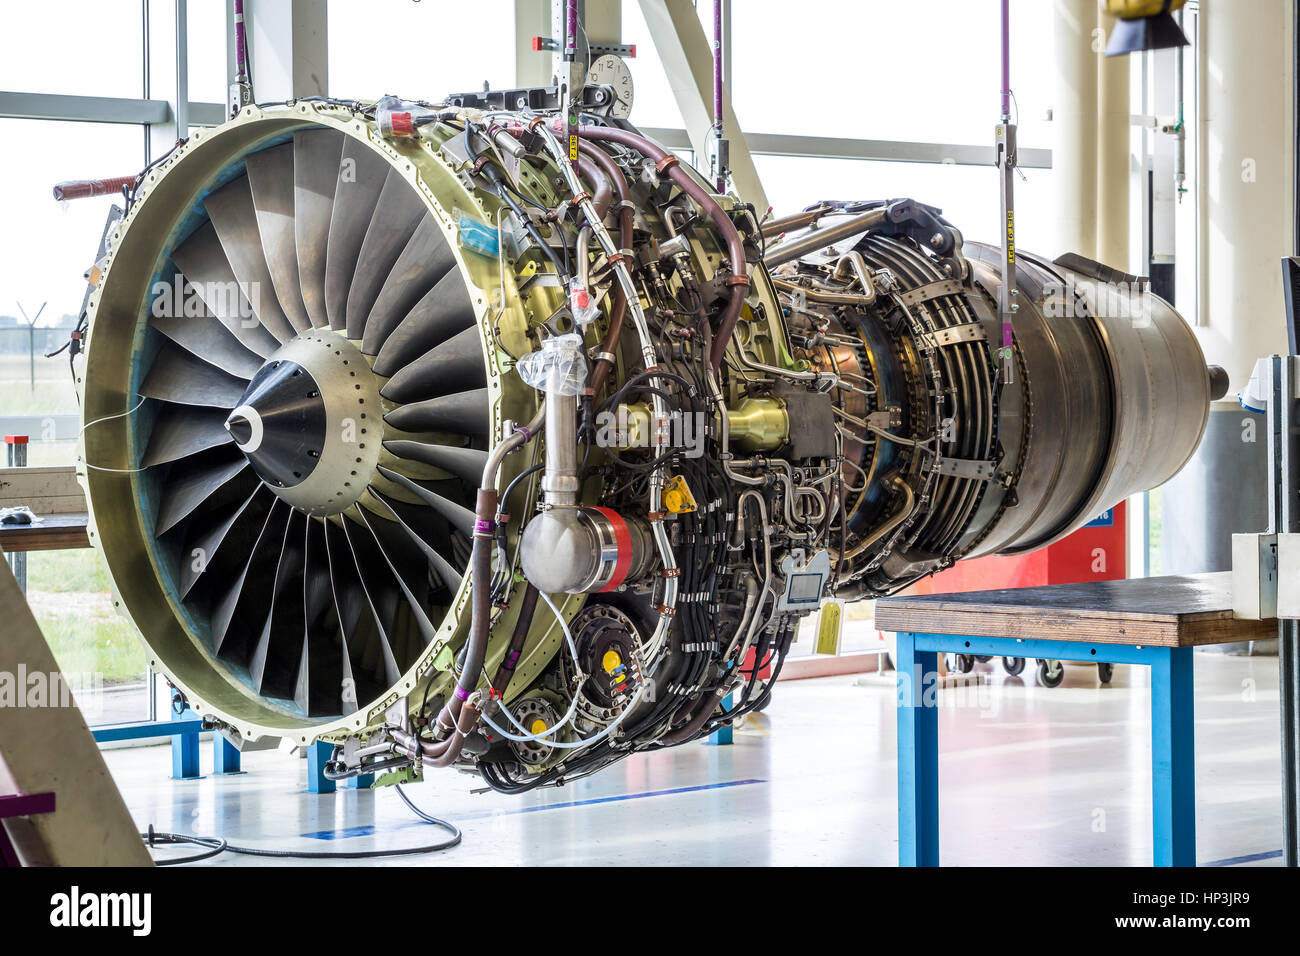 Engine's maintenance in huge industrial hall, airport Shipol, Amsterdam, The Netherlands Stock Photo